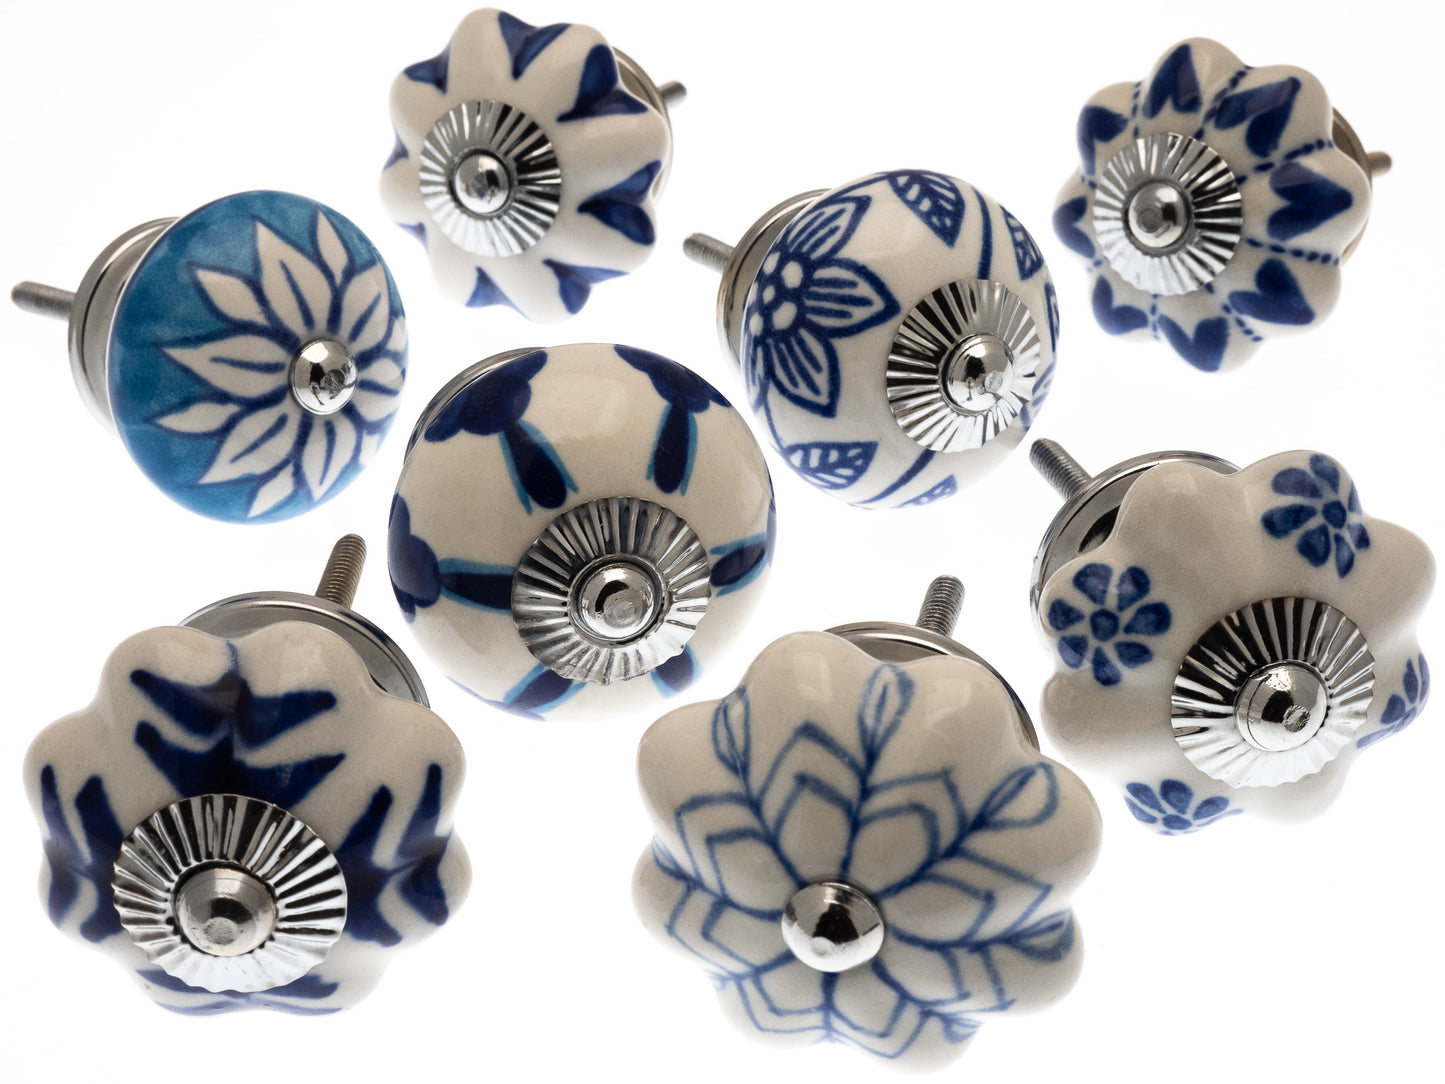 Cupboard Knobs in Cobalt Blue and Turquoise Pack of 8